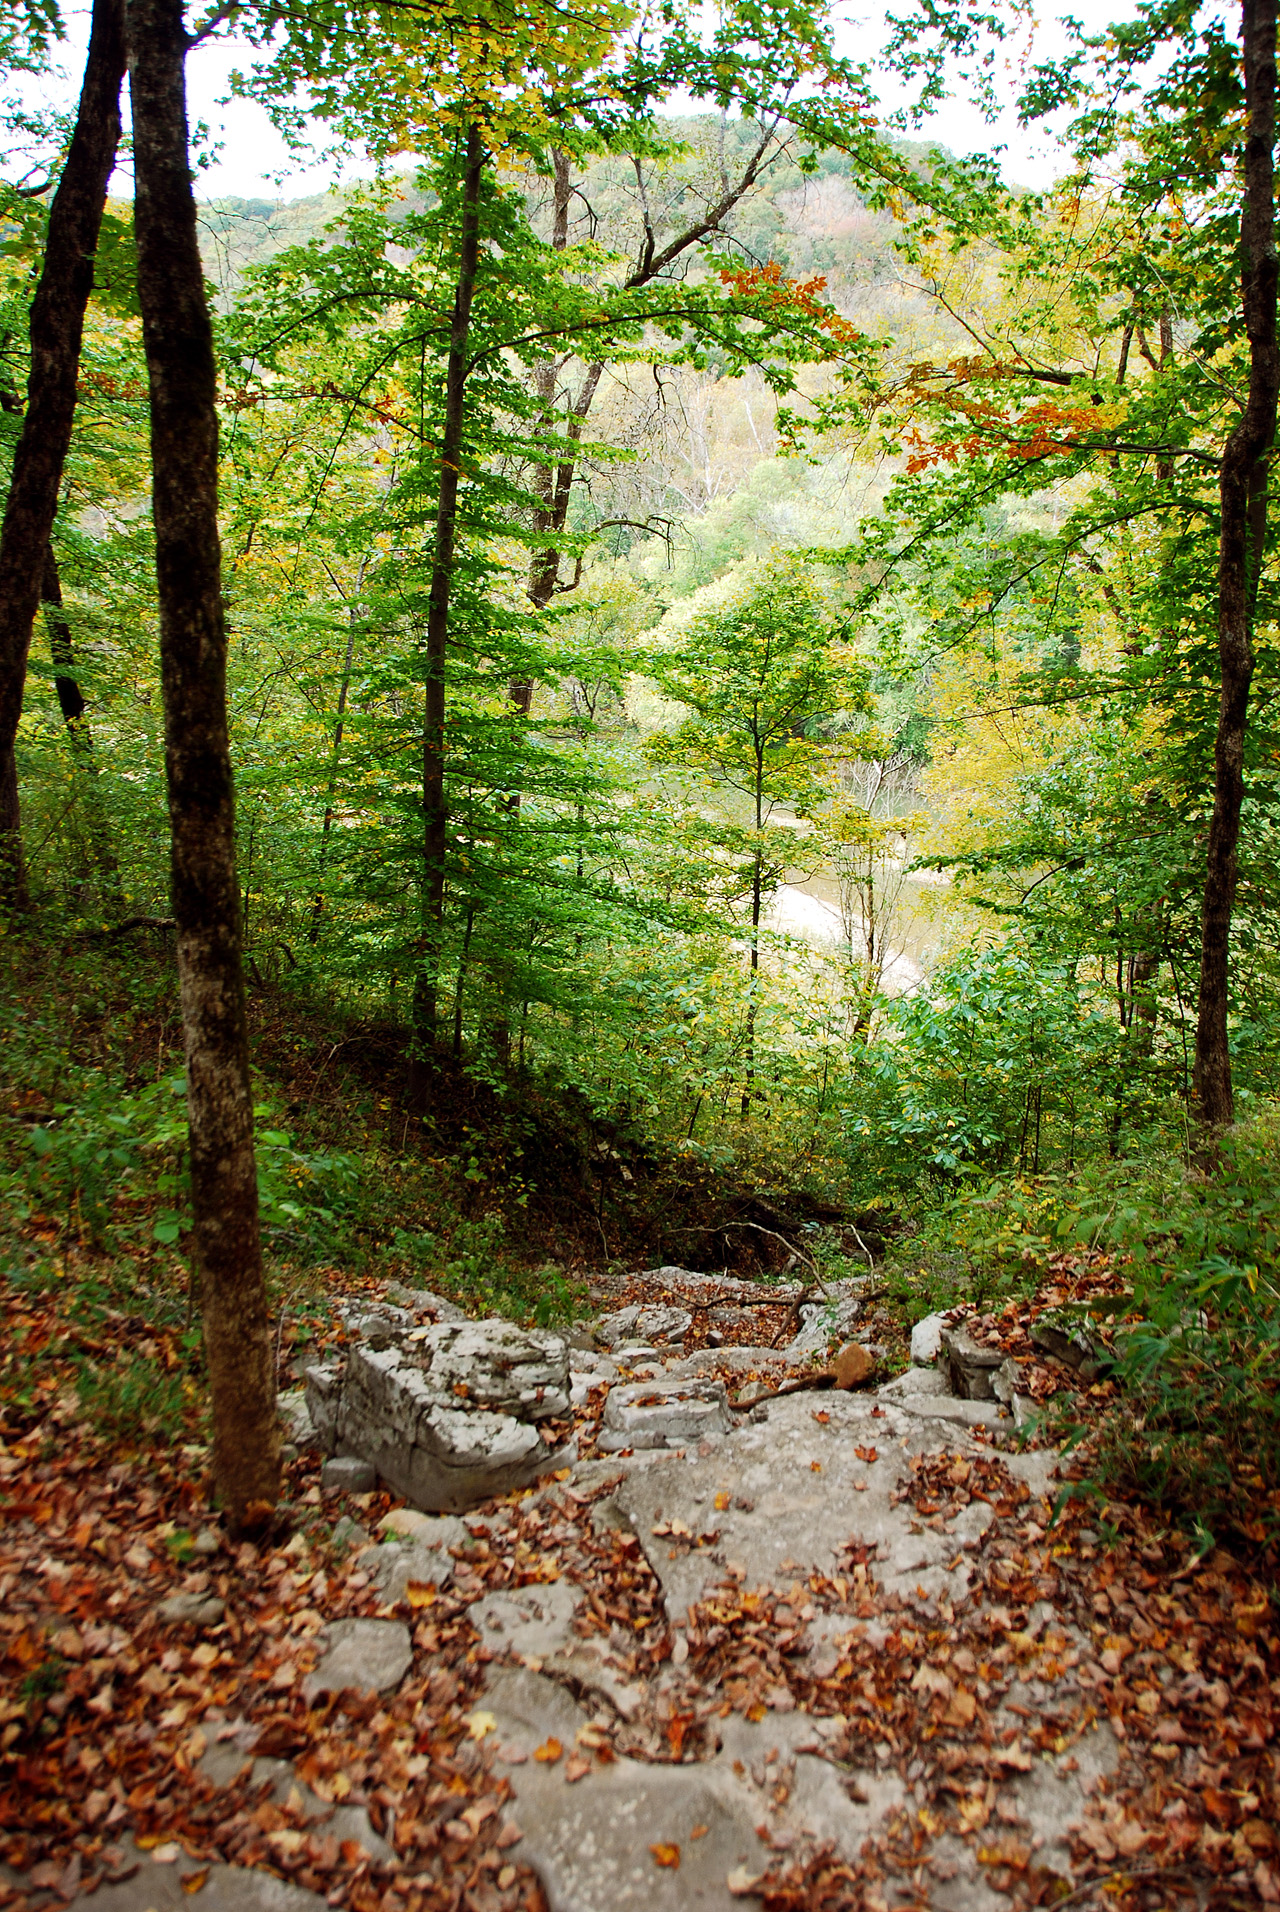 2012-10-12, 021, Mammoth Cave NP, KY